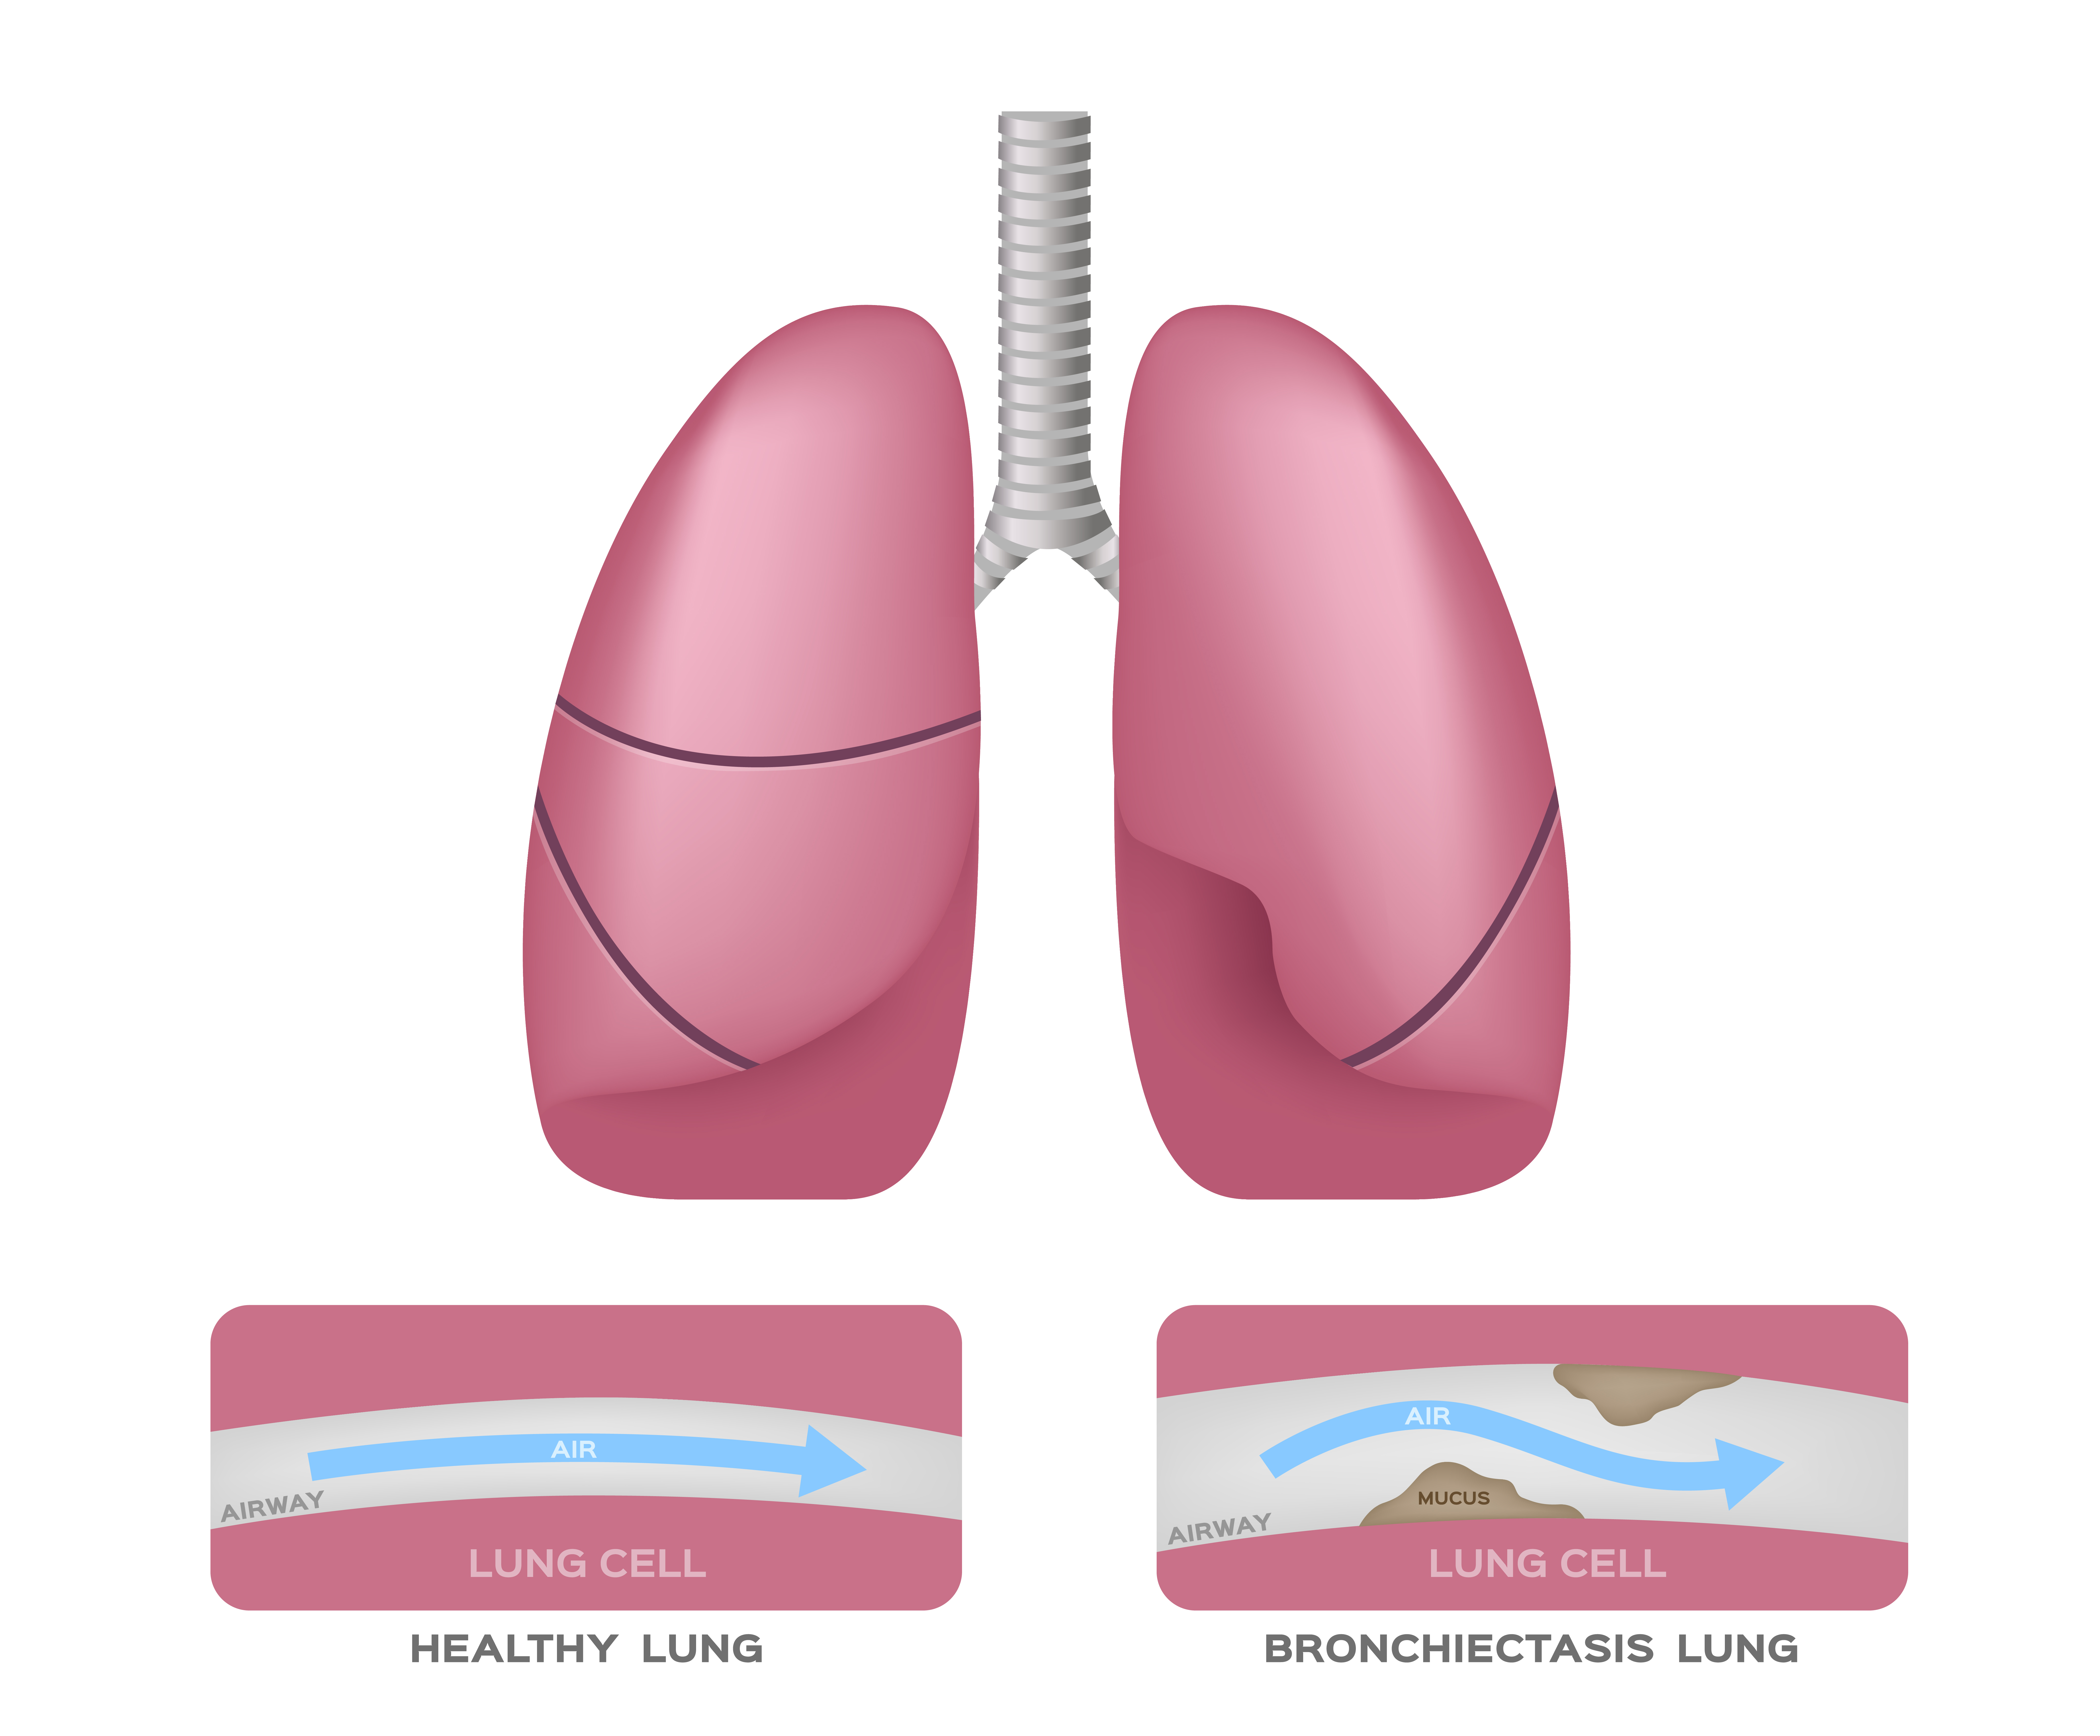 Bronchiectasis in the lungs